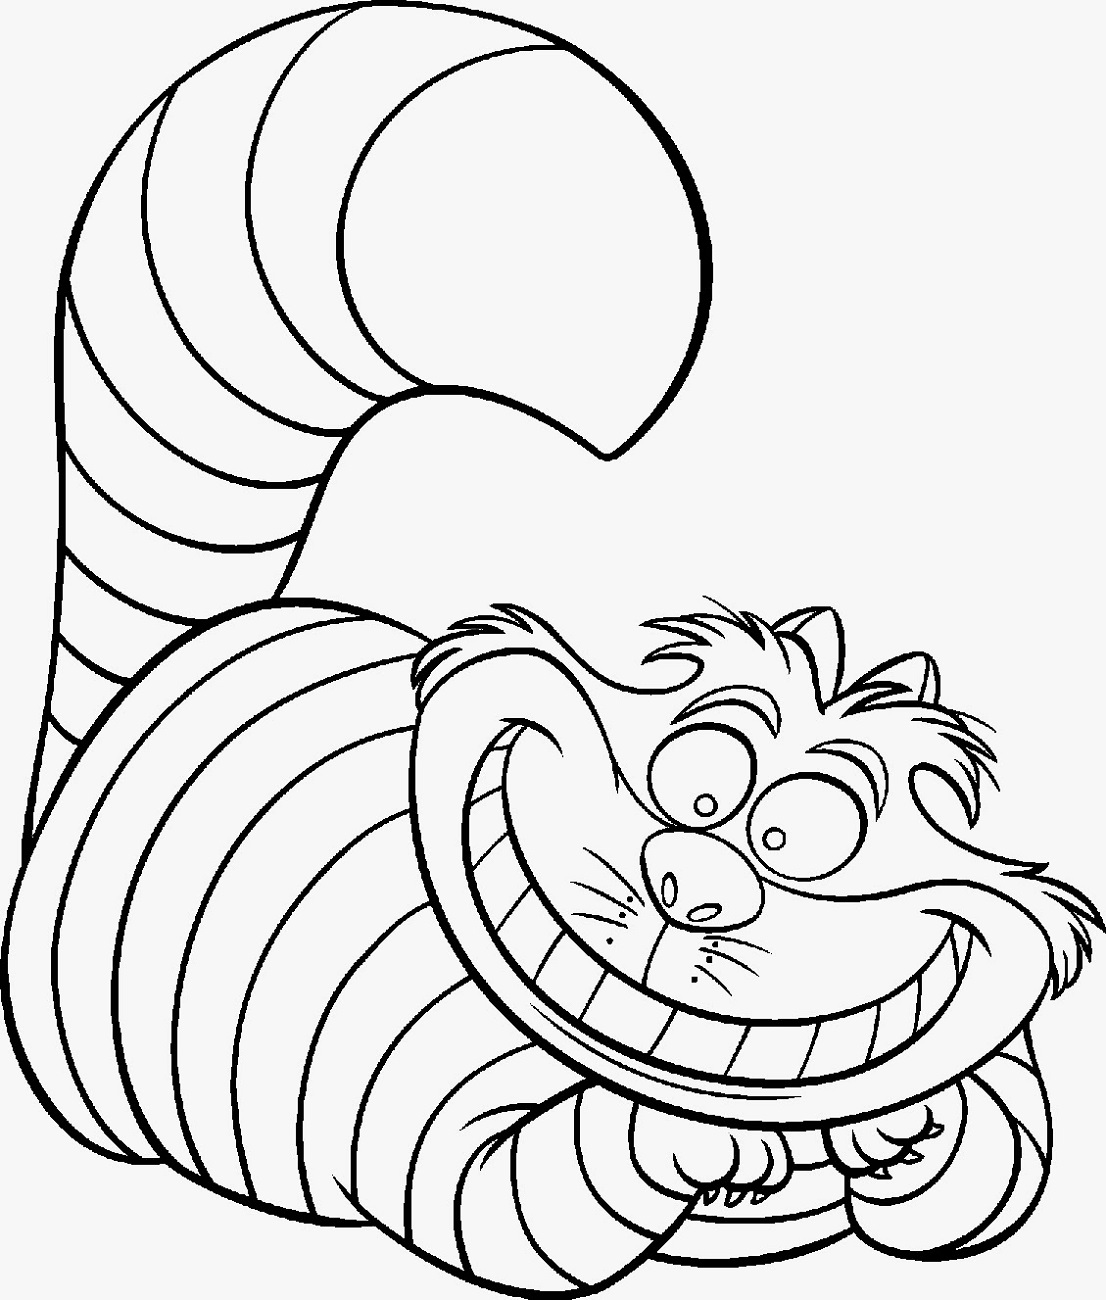 Coloring Pages Online Cartoon